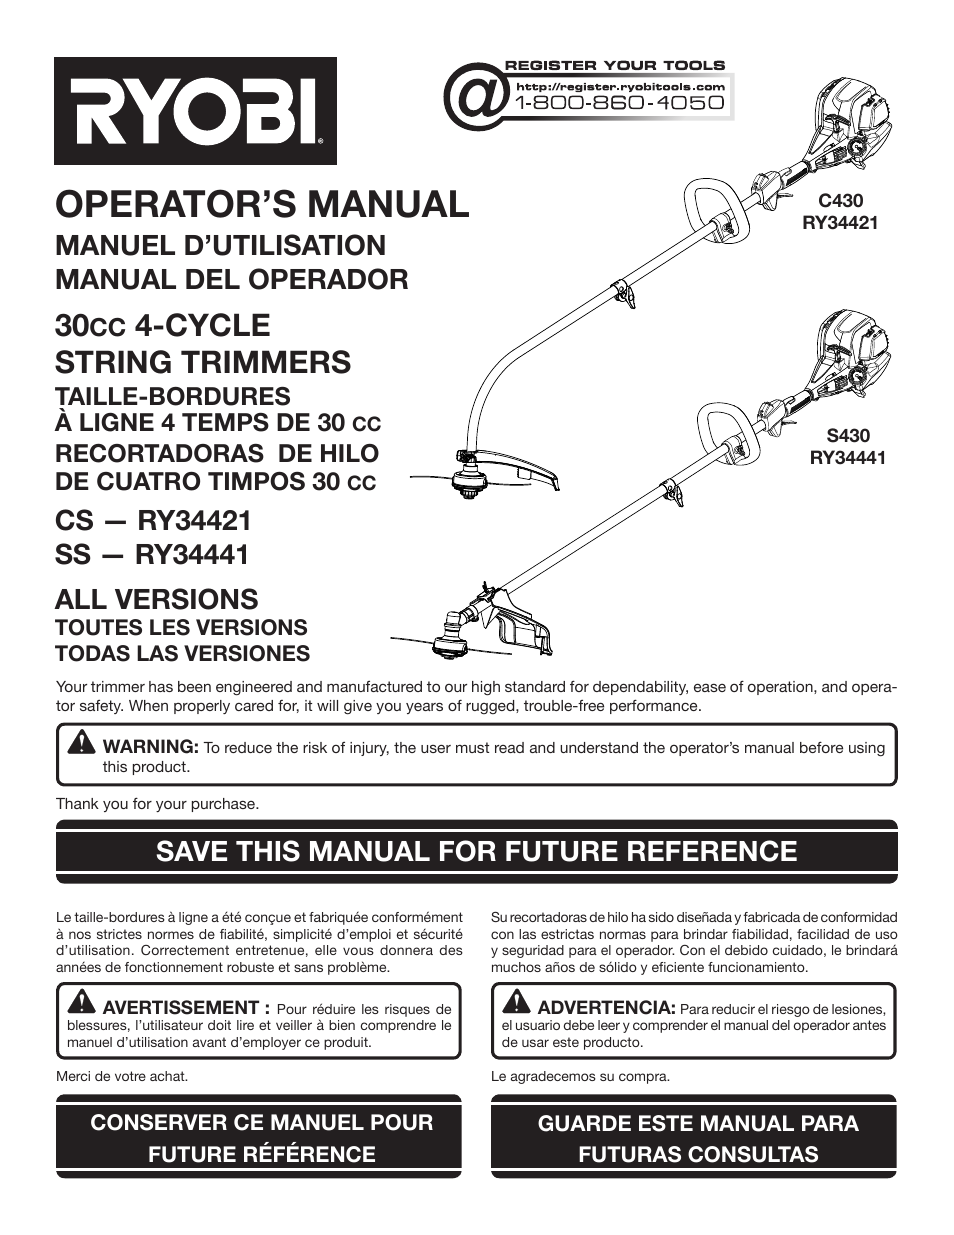 Ryobi S430 RY34441 User Manual | 56 pages | Also for: C430 RY34421